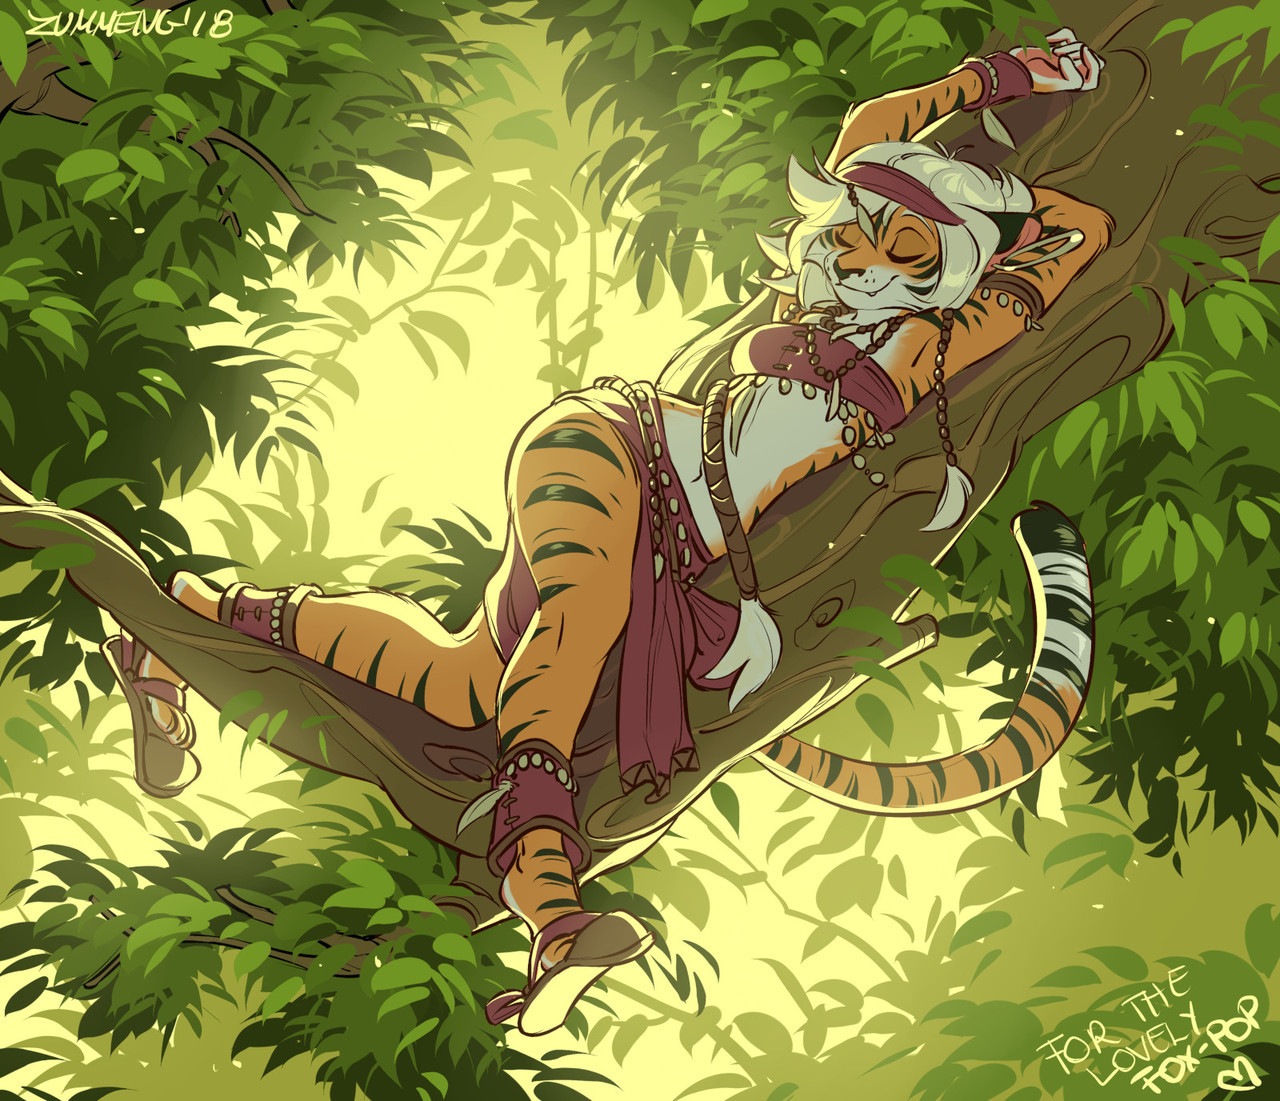 zummeng:  [ART TRADE] Napping   A trade I made with the awesome Fox-Pop: https://www.furaffinity.net/user/fox-pop/